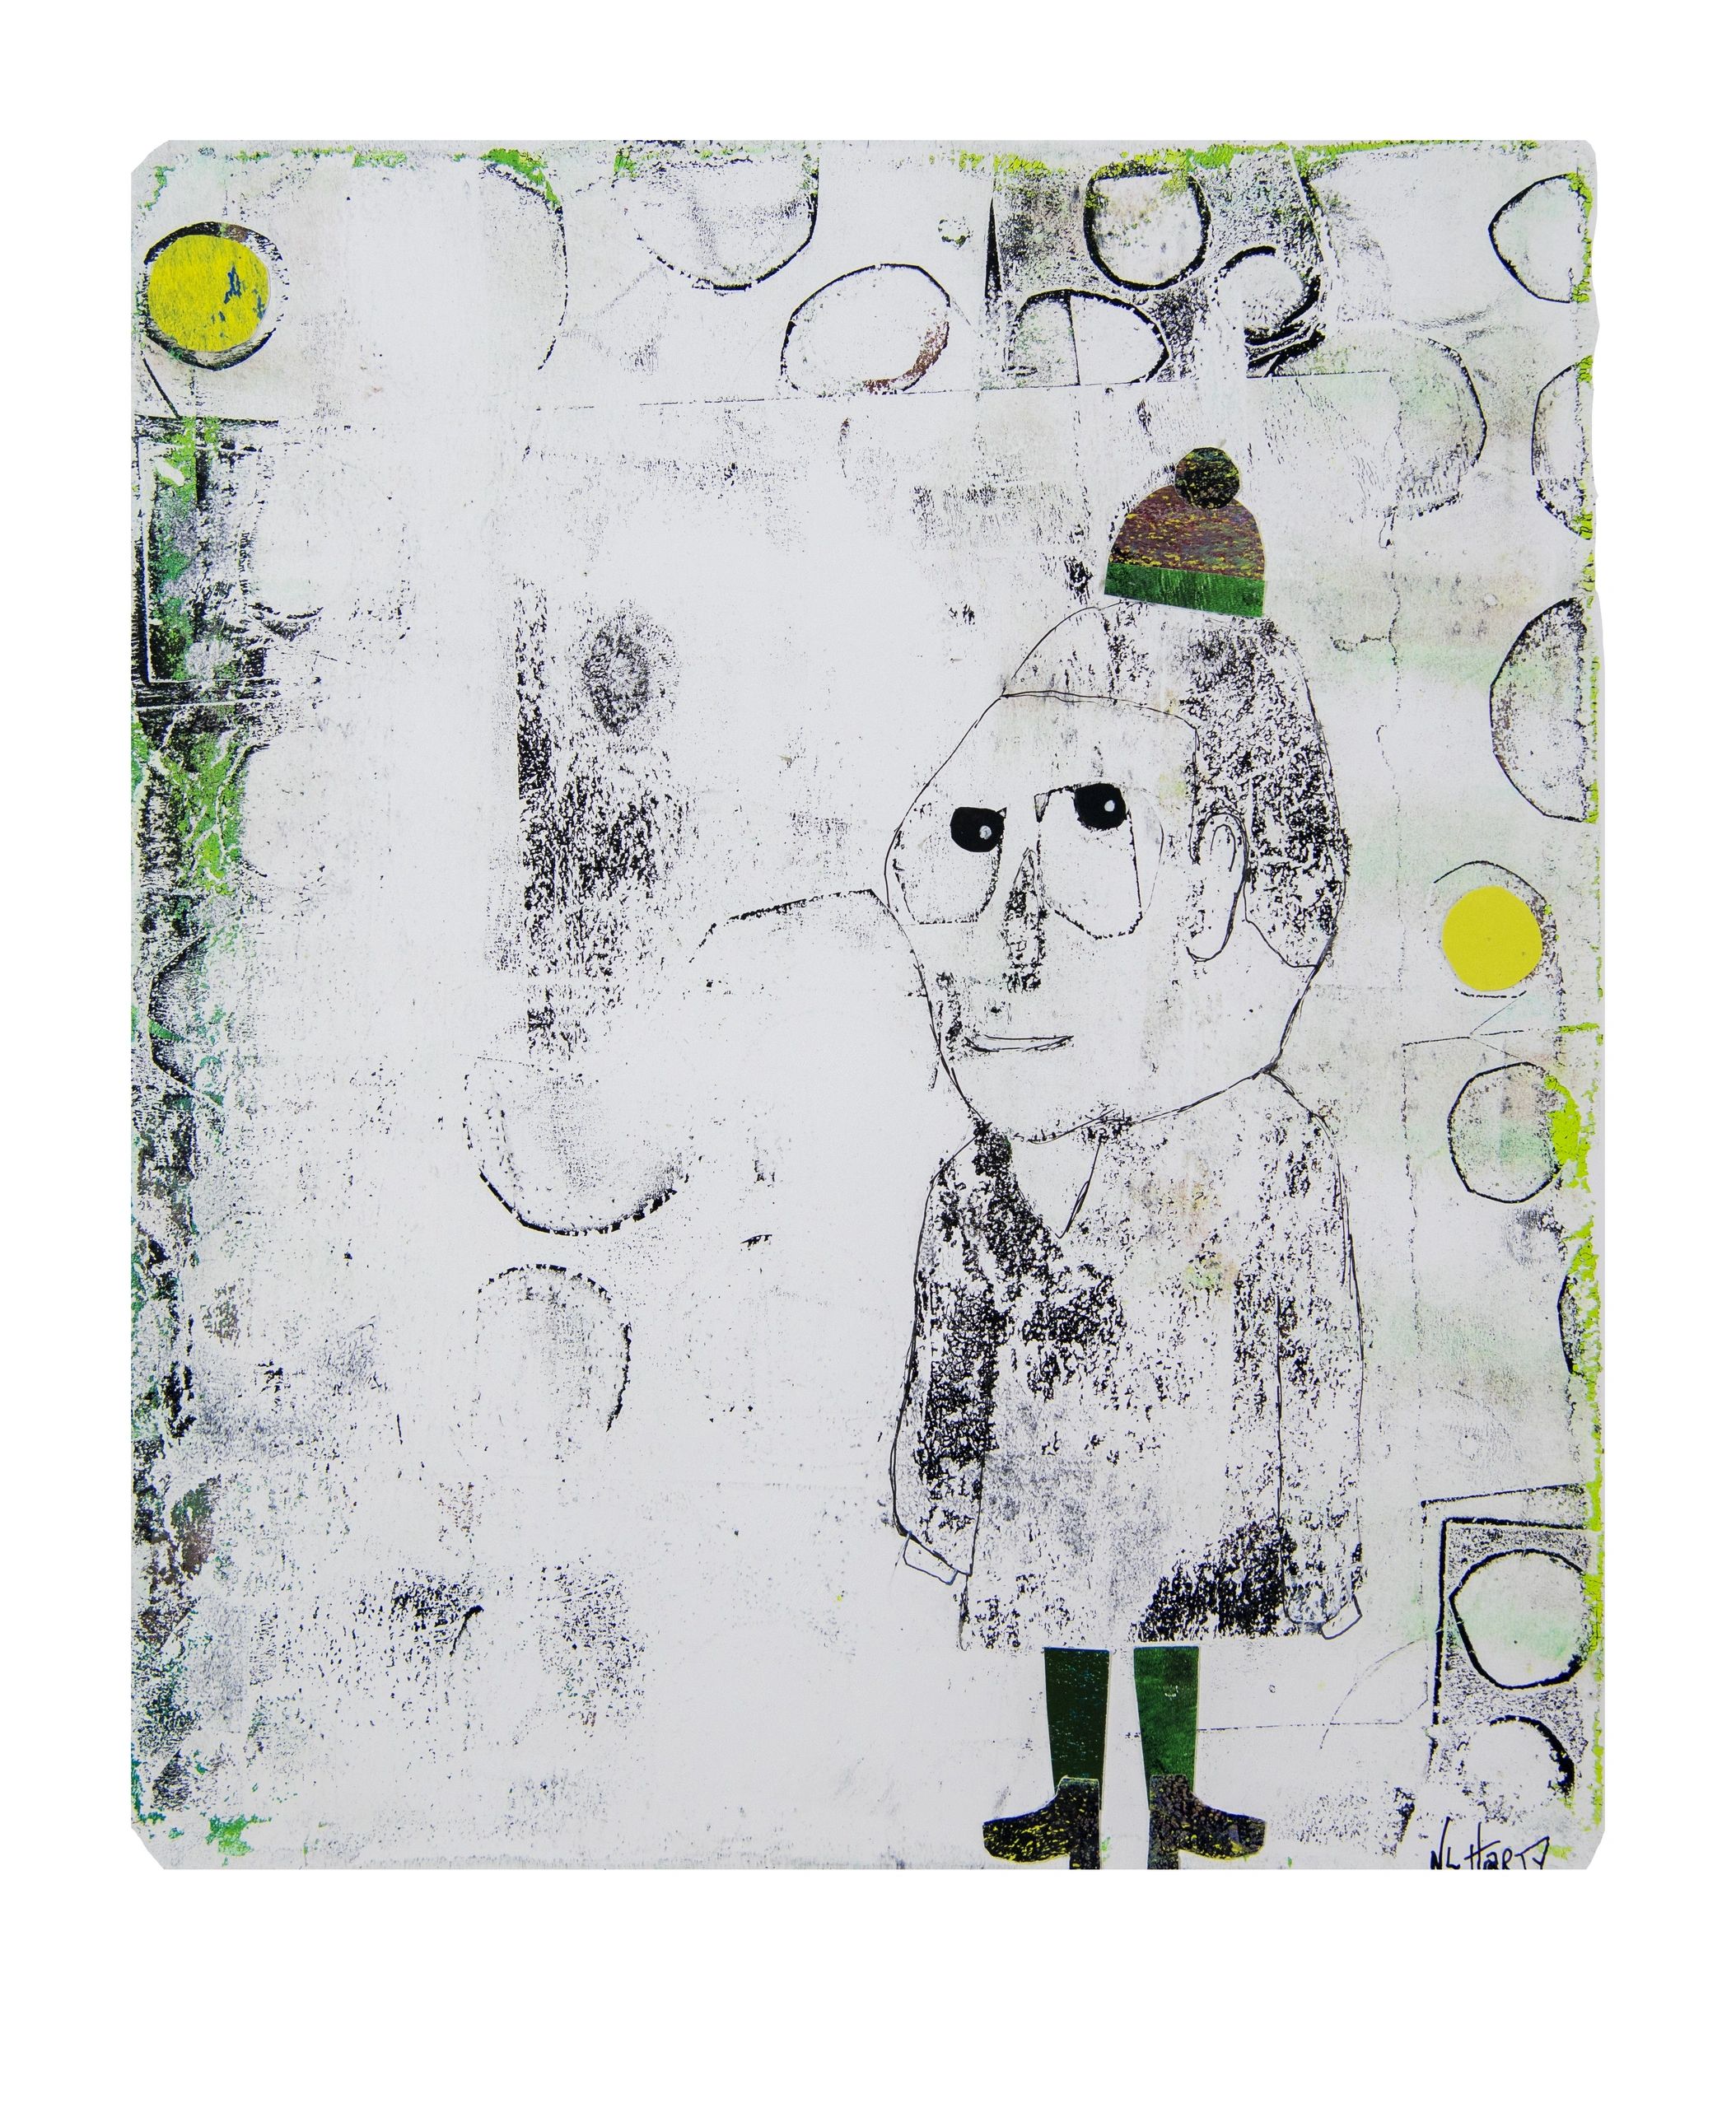 mixed media- little man with a pom-pom collage hat, legs and boots